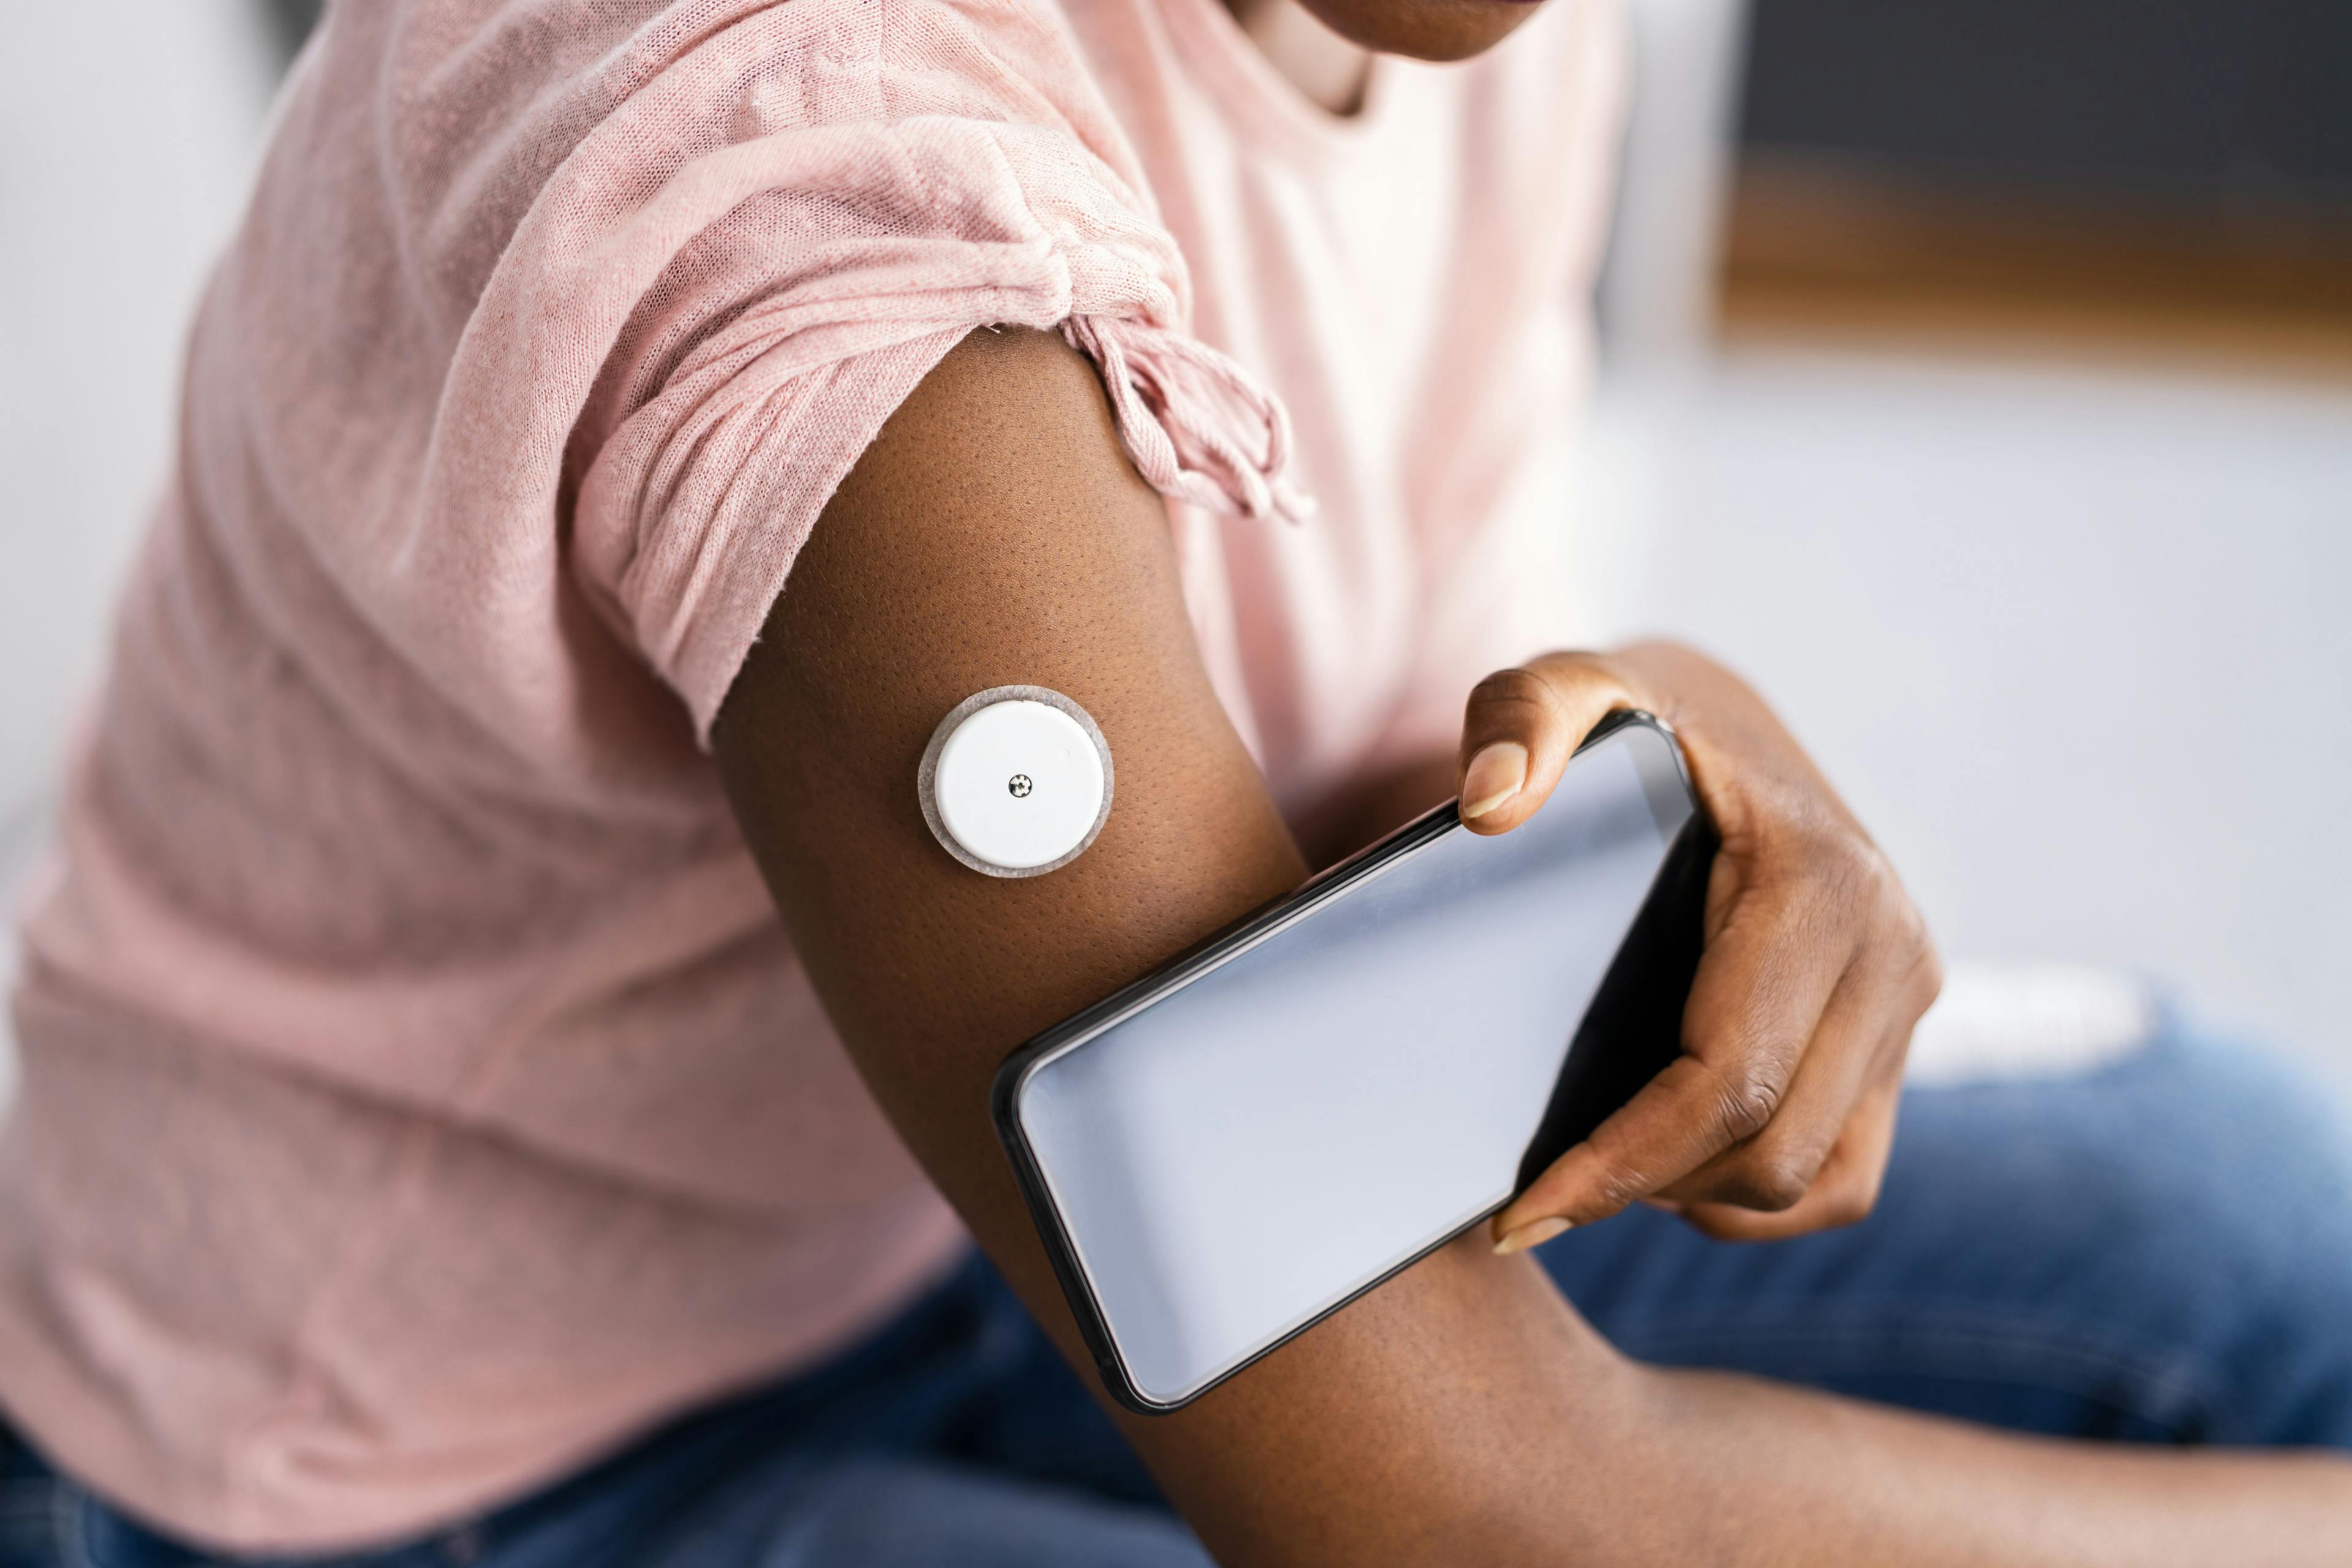 Policy Changes Can Help Implement Continuous Glucose Monitoring